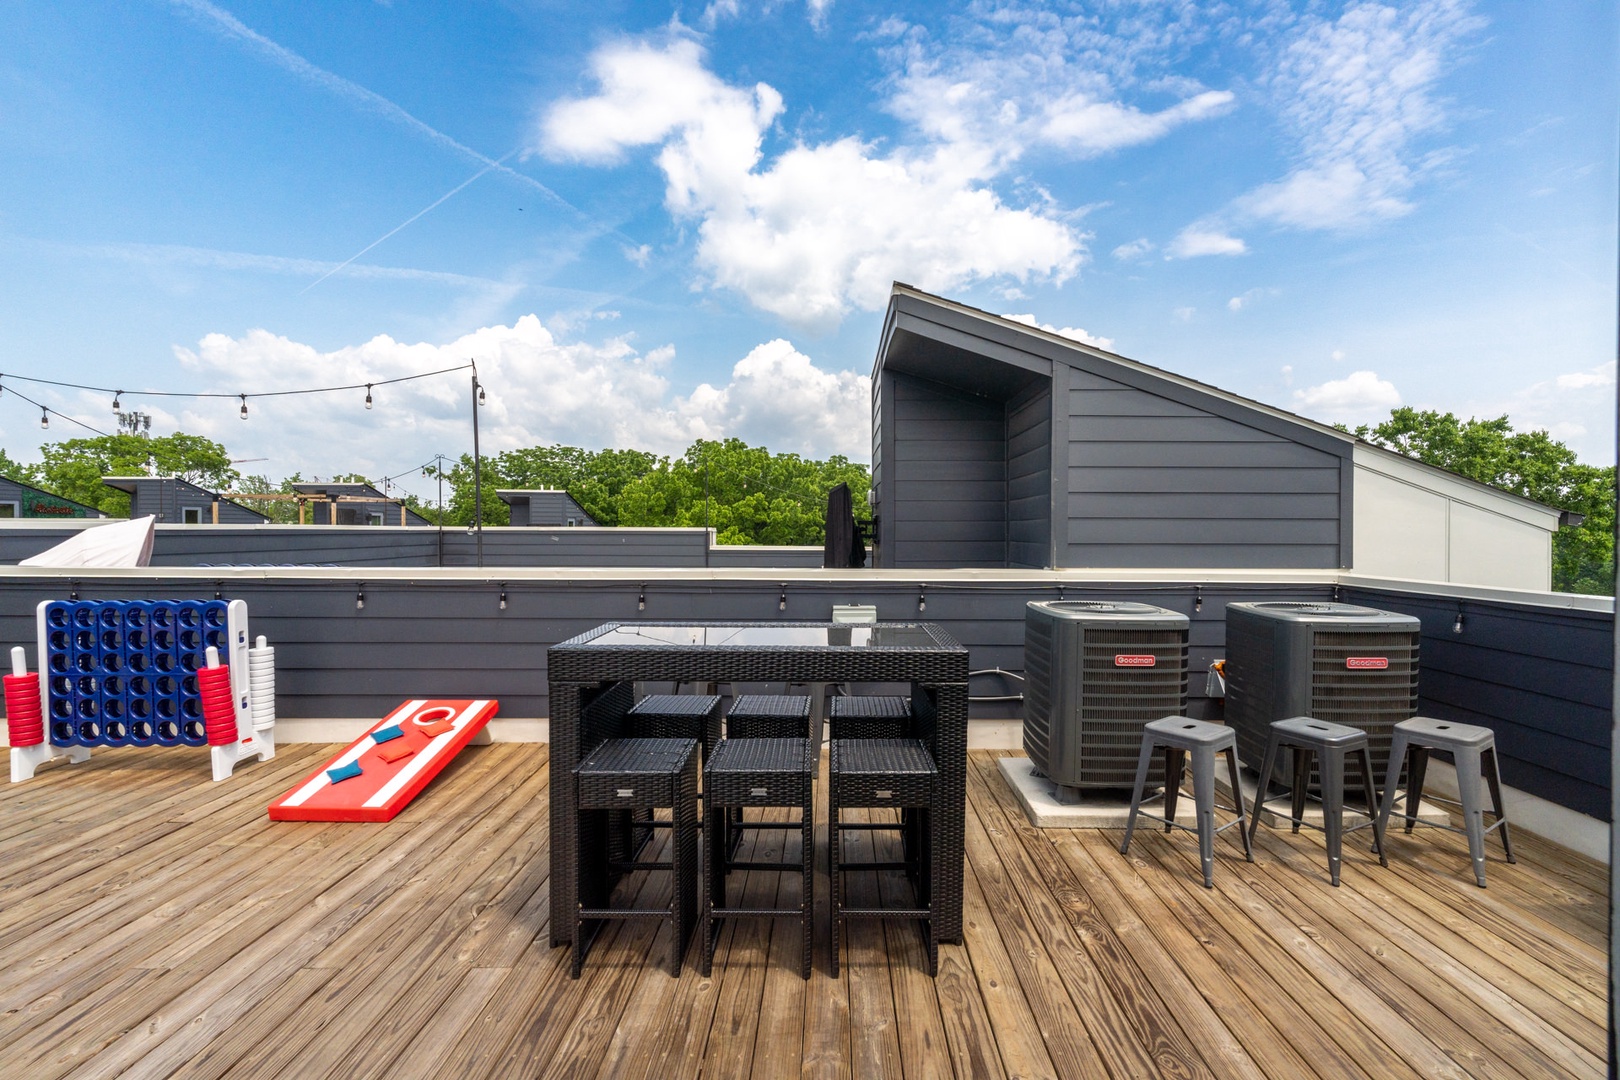 Rooftop deck with gas BBQ grill, cornhole, and ample seating